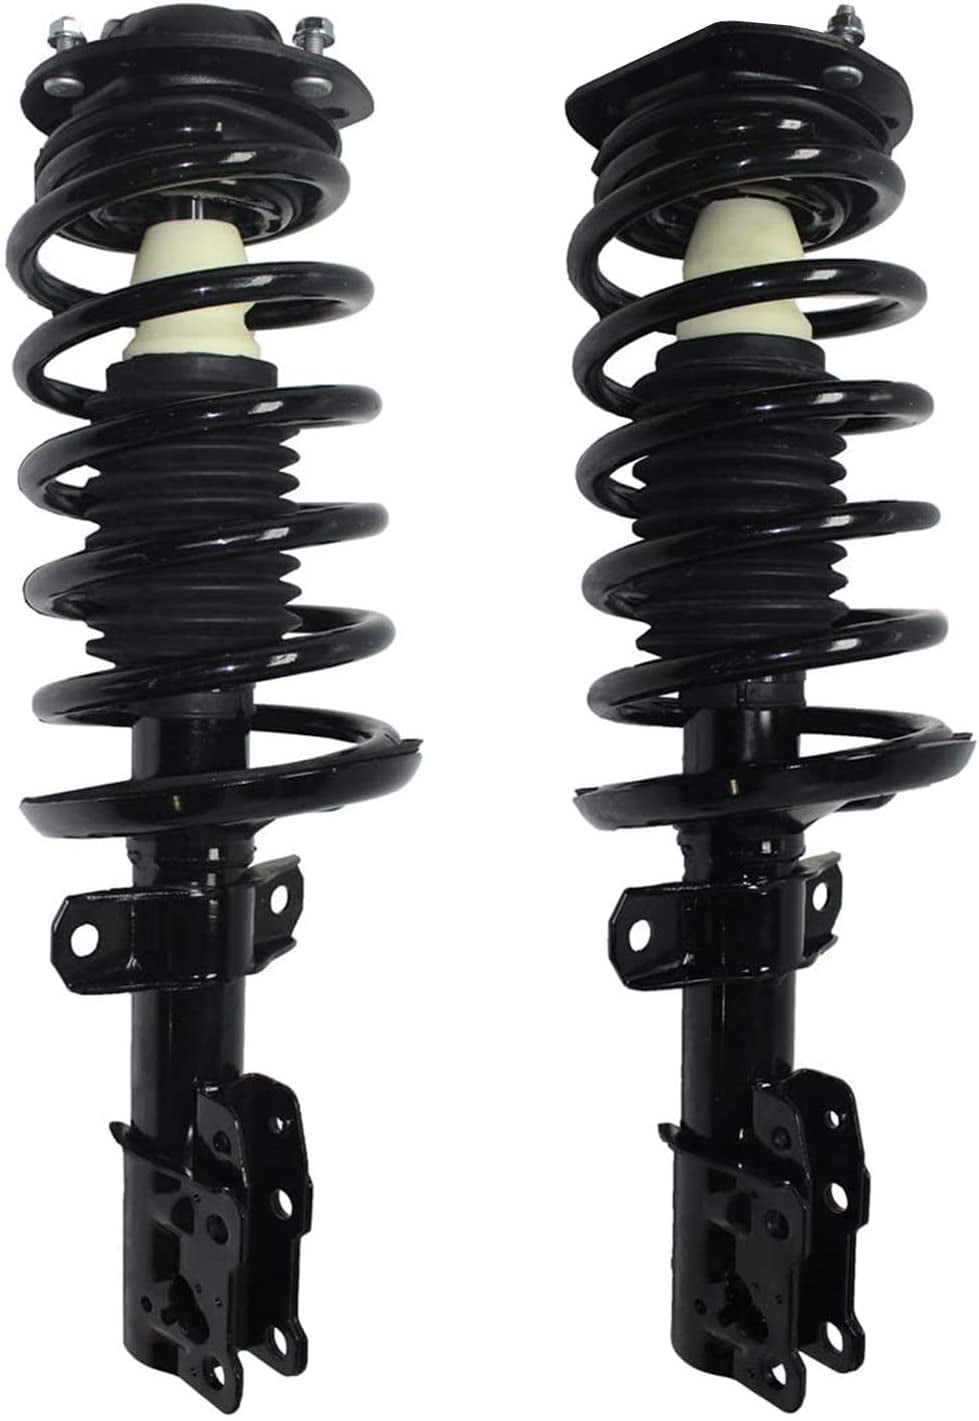 Detroit Axle - Front Struts w/Coil Spring Rear Shock Absorbers Replacement  for Chevy Cobalt HHR Pontiac G5 - Walmart.com